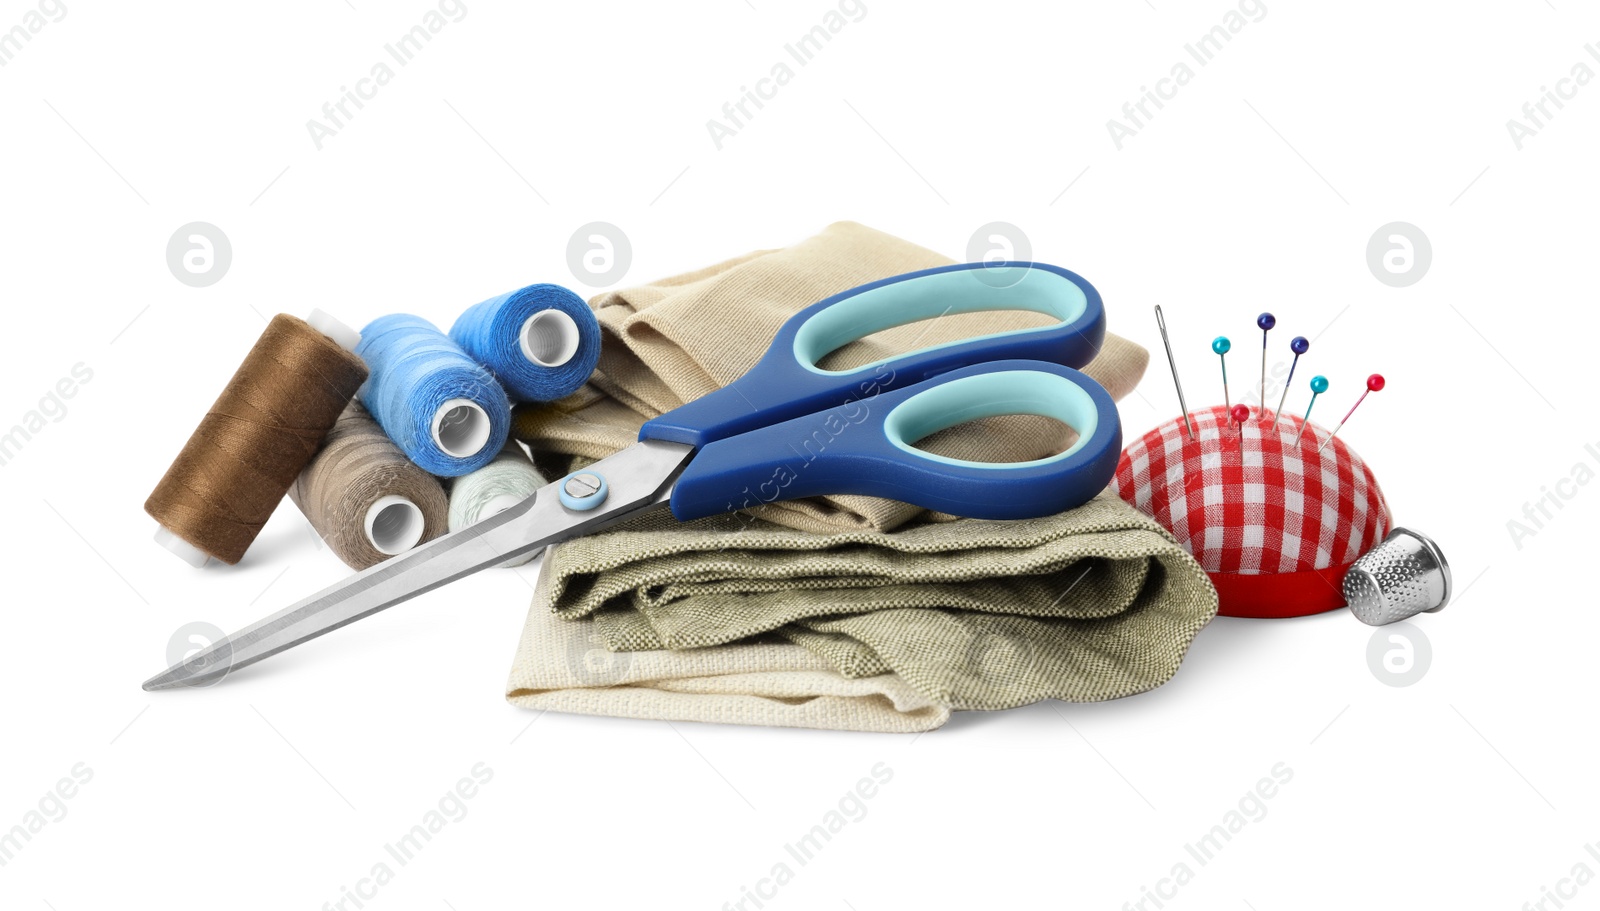 Photo of Scissors, spools of threads and sewing tools on white background